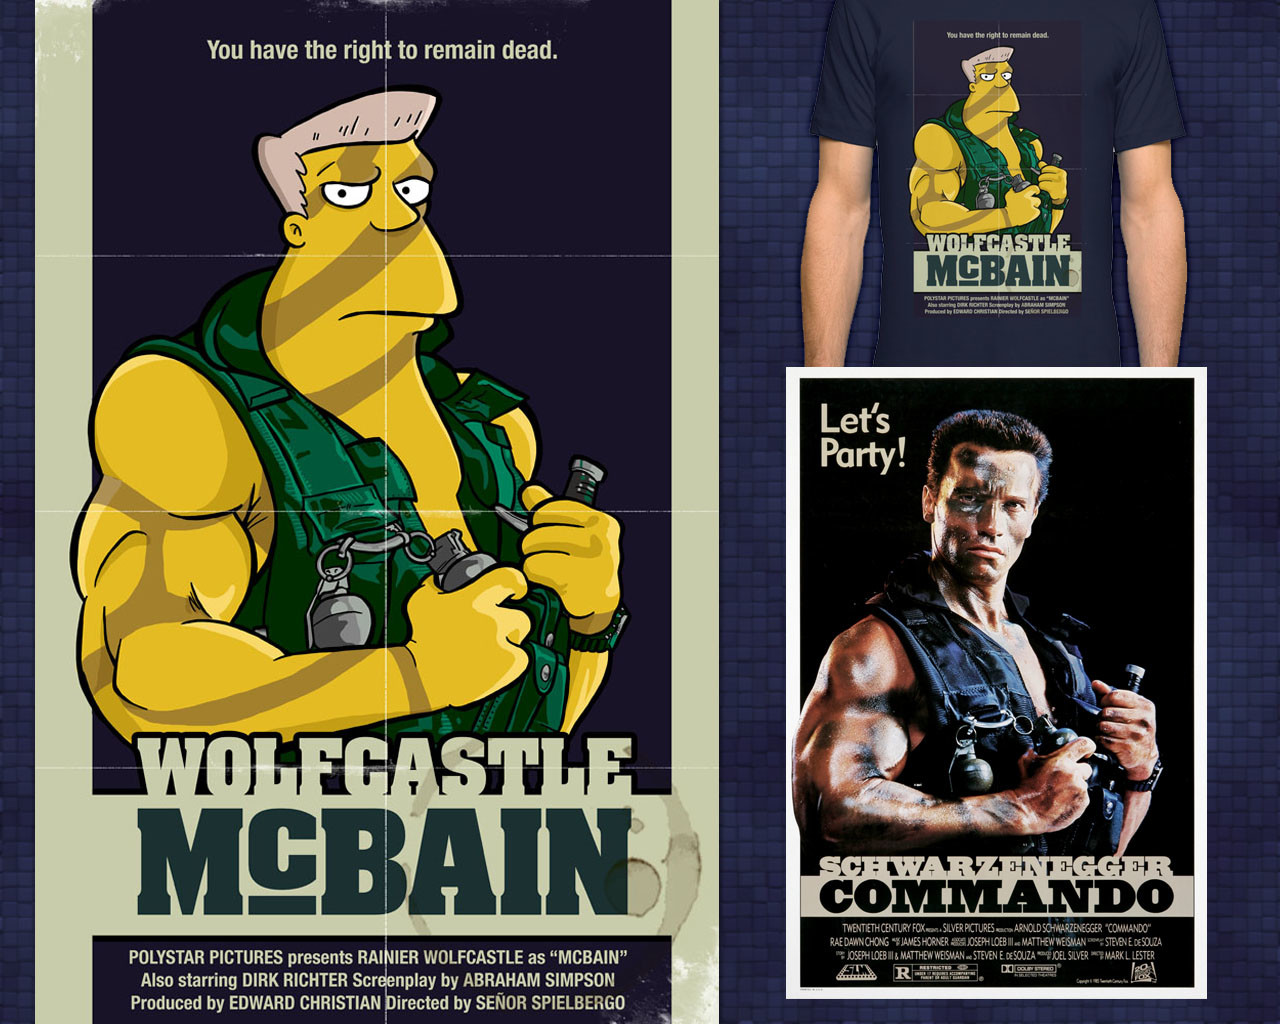 McBain, with references